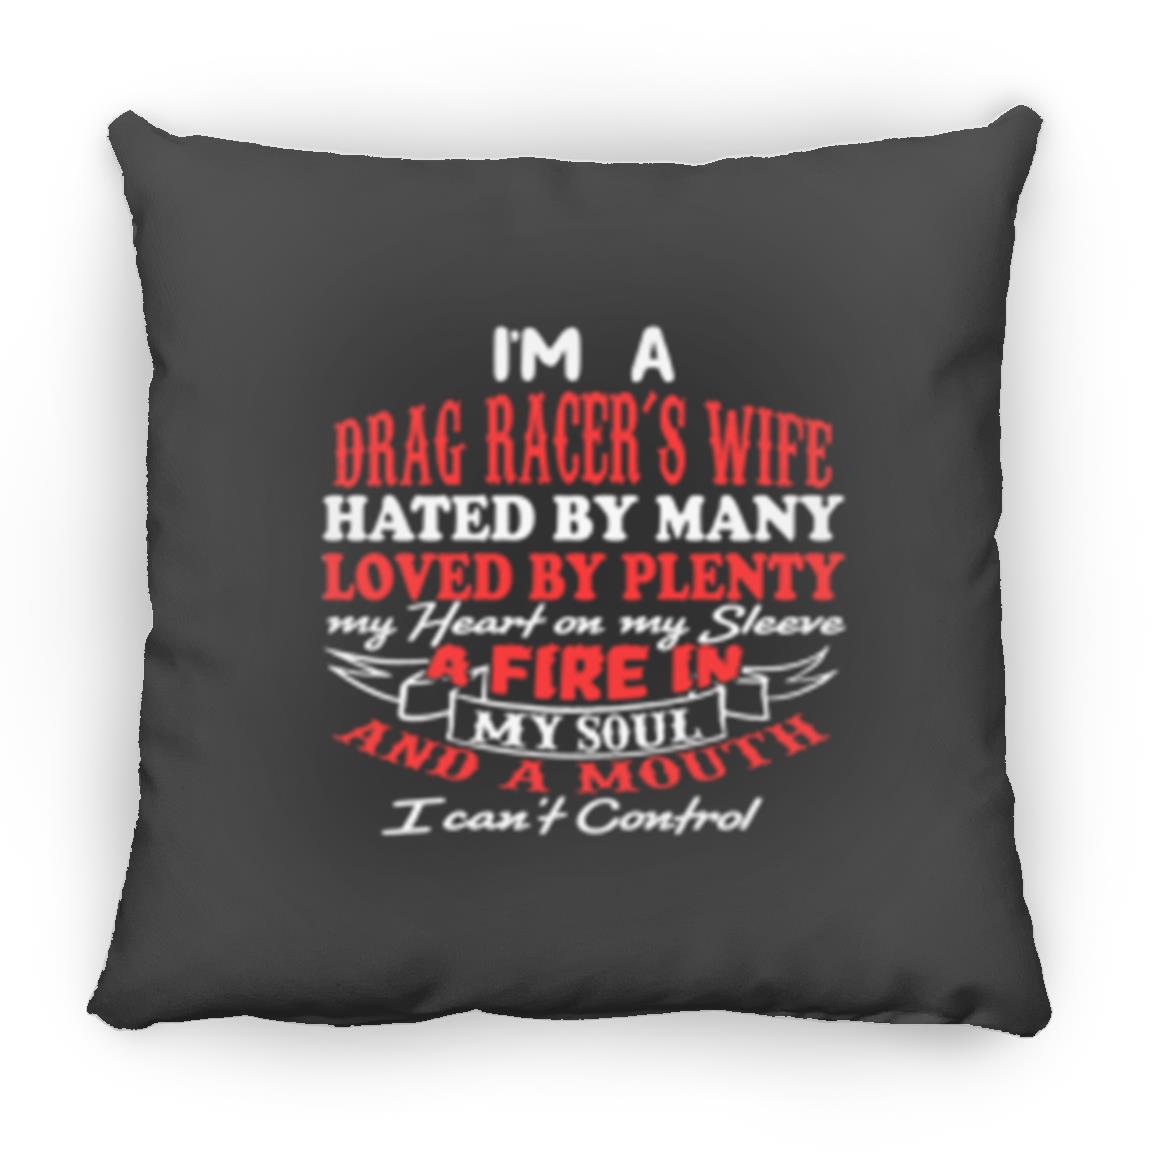 I'm A Drag Racer's Wife Hated By Many Loved By Plenty Large Square Pillow